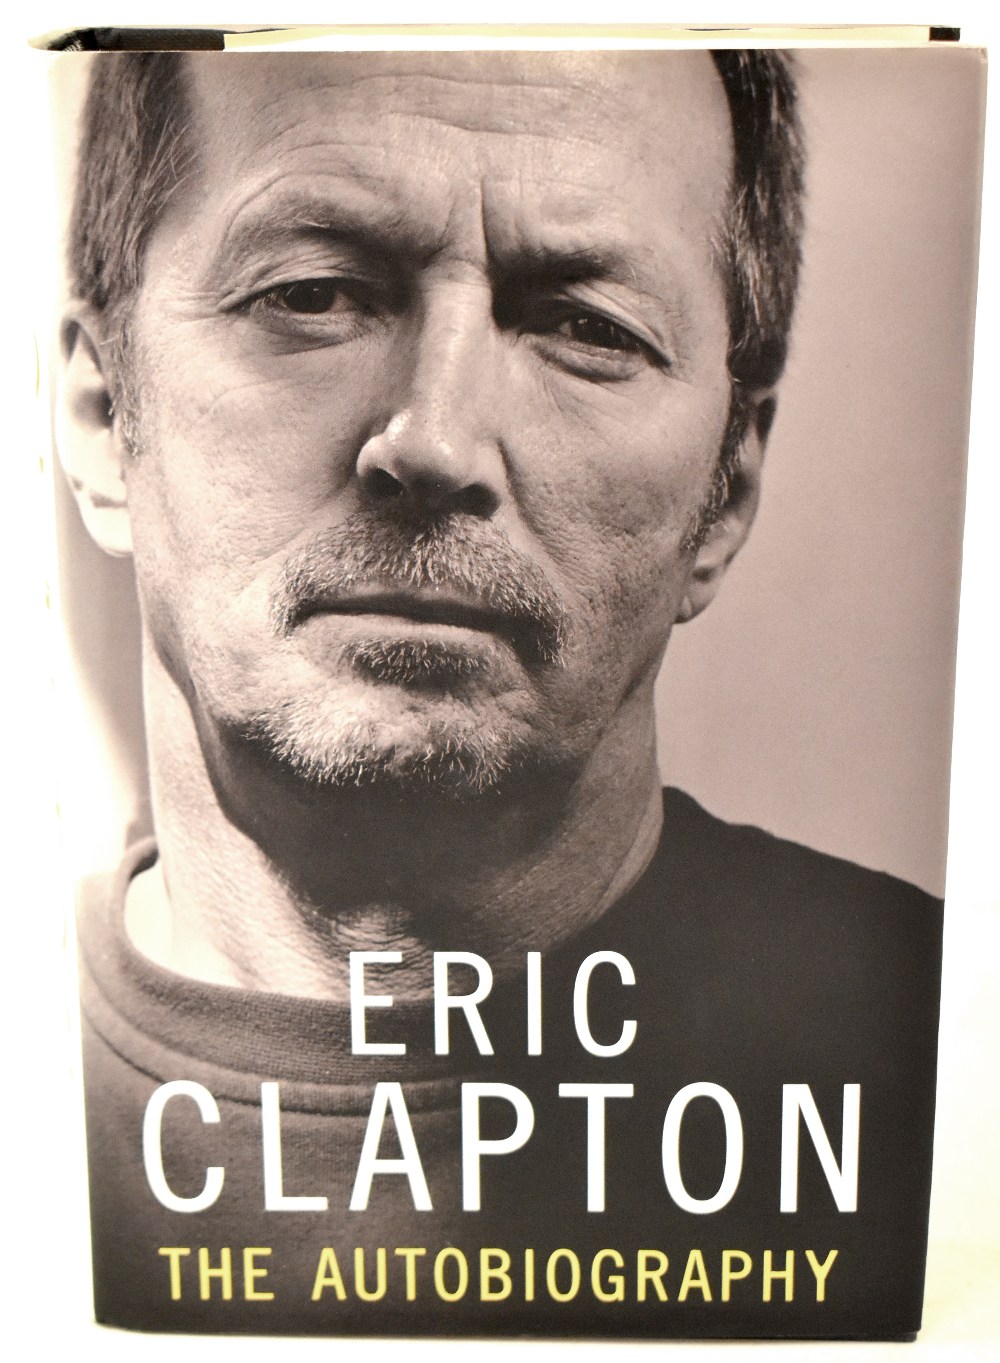 ERIC CLAPTON; 'Eric Clapton: The Autobiography', a signed hardback edition,